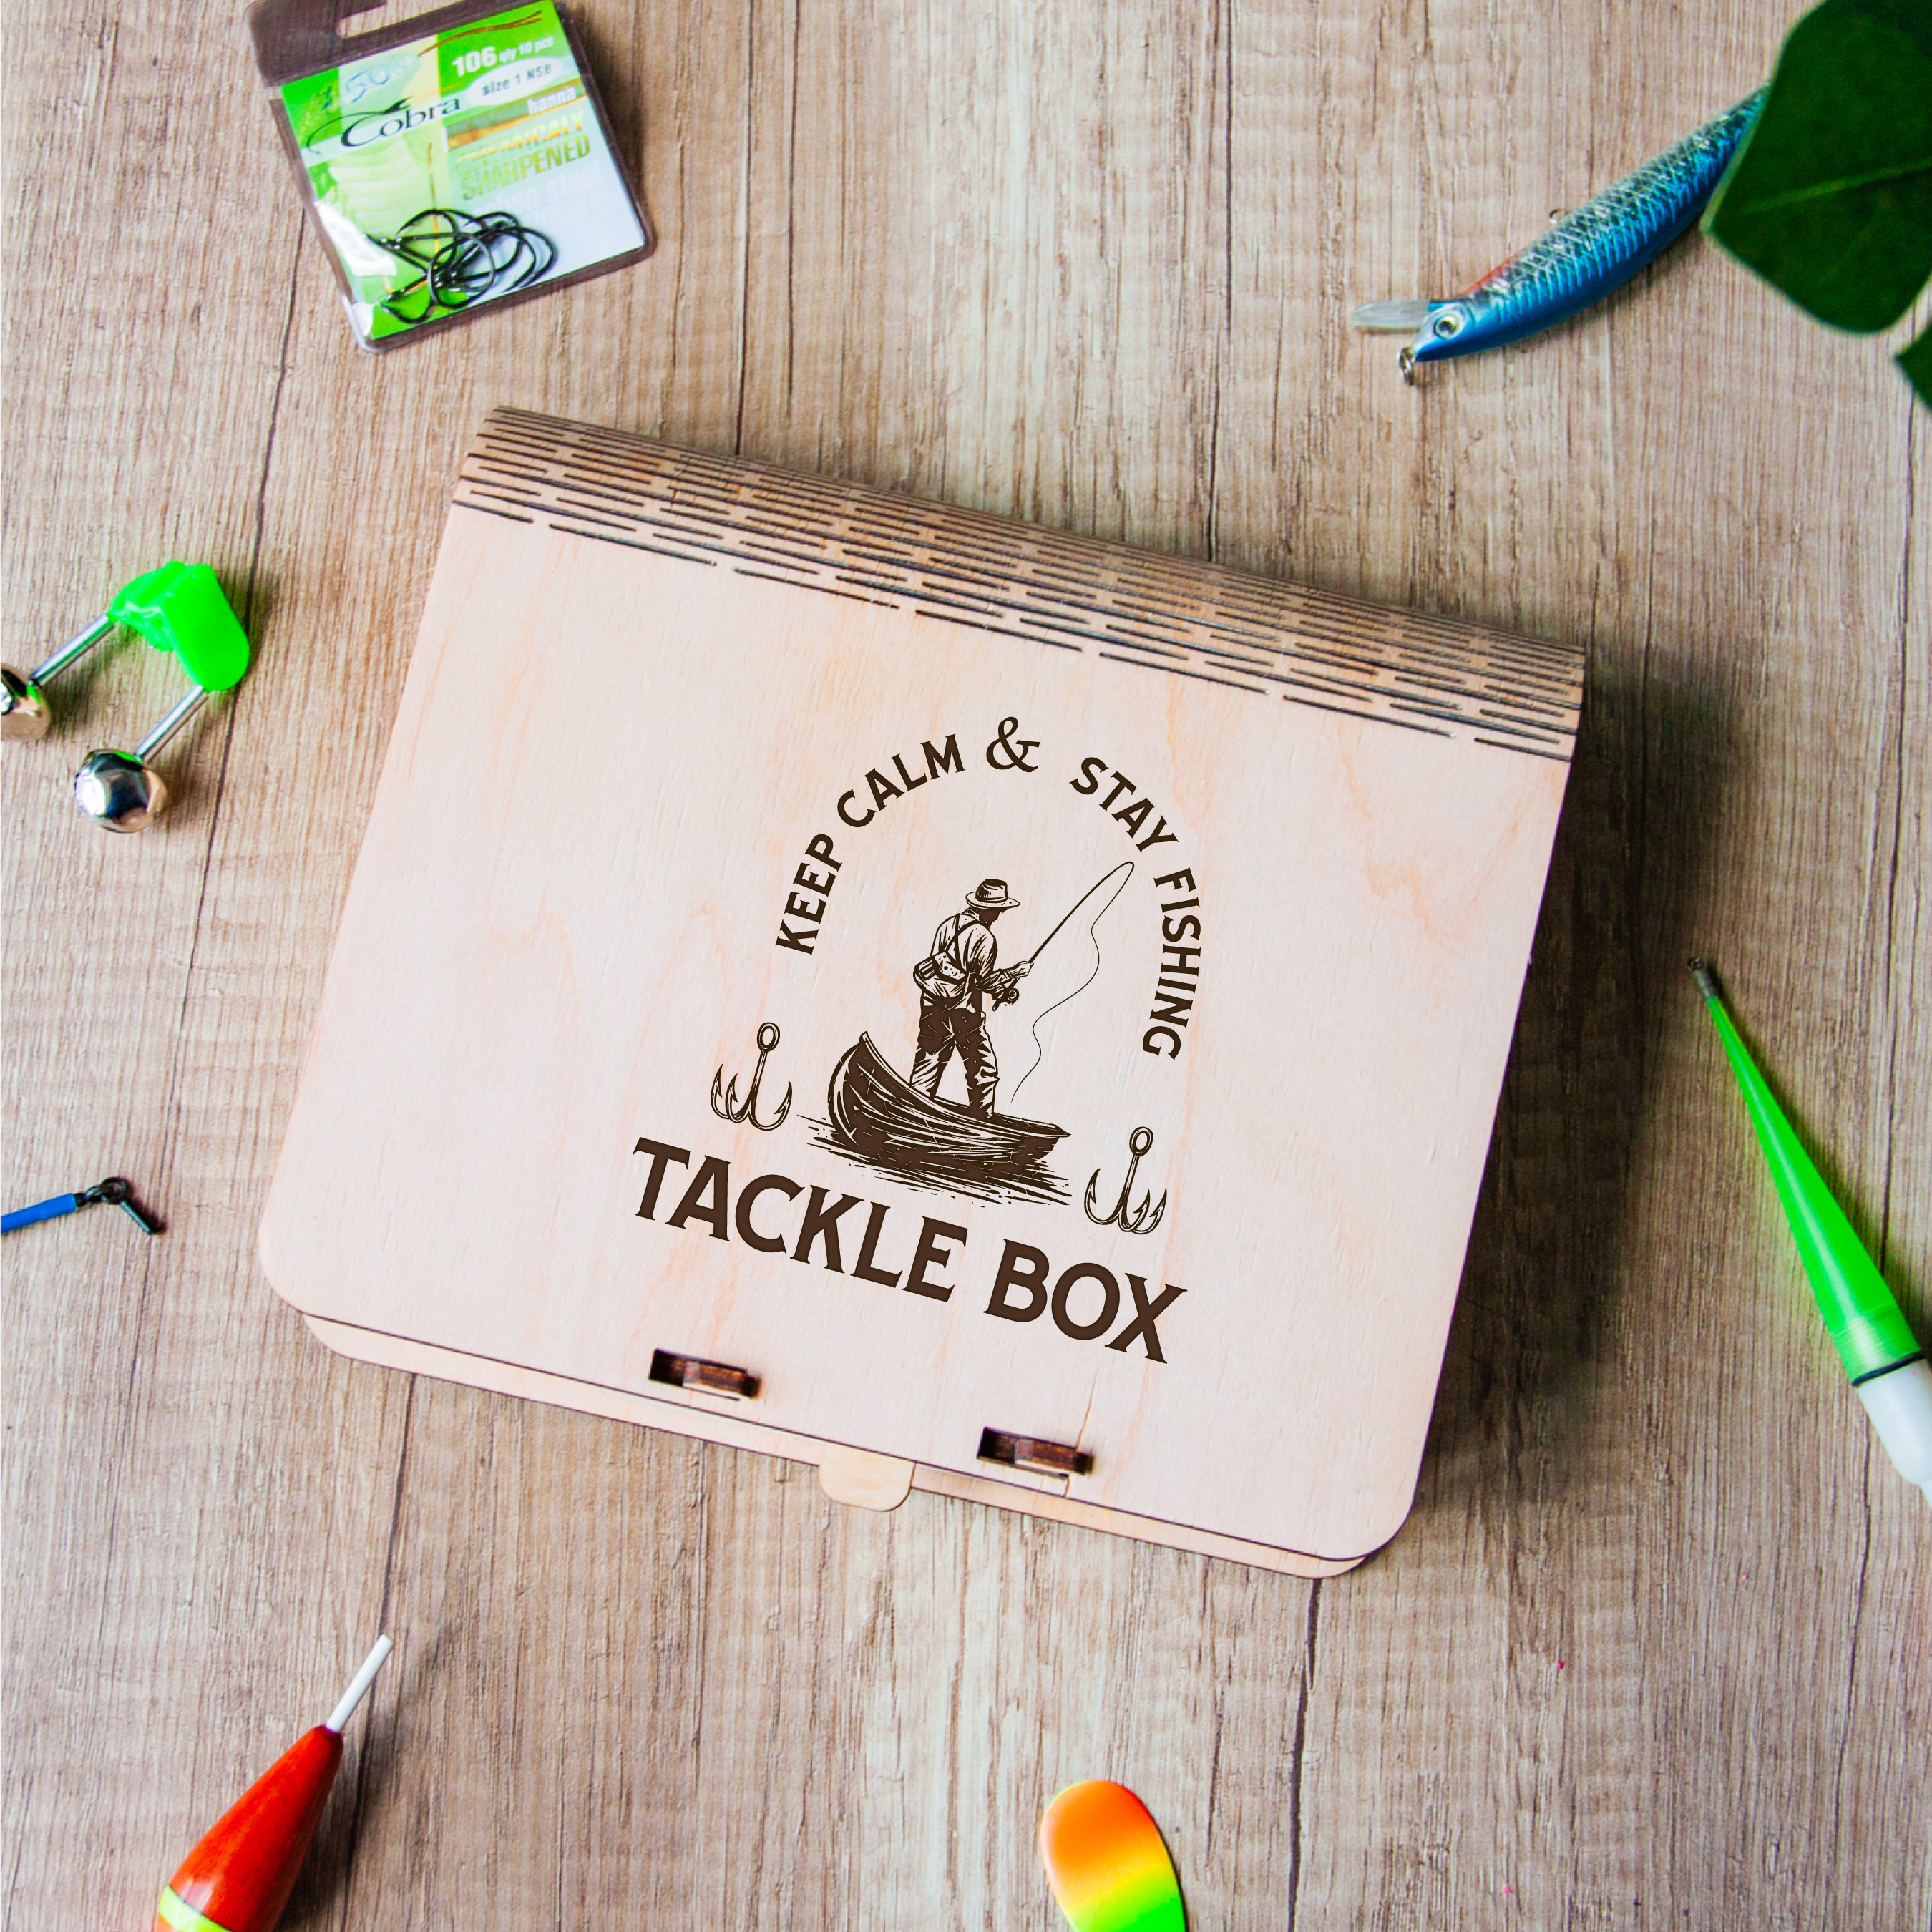 Buy Tackle Box online